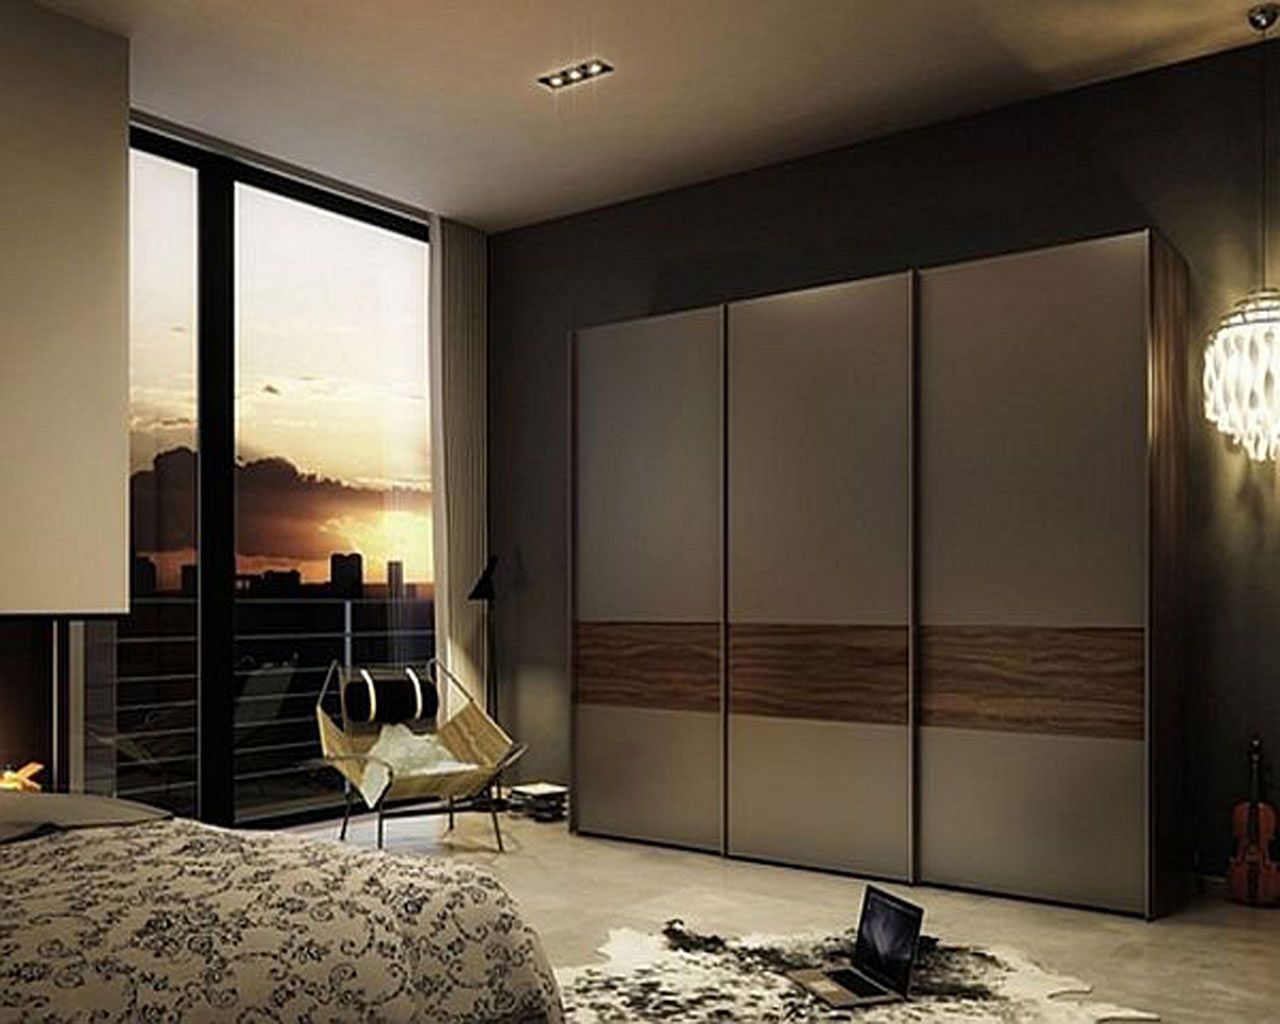 8 Beautiful Wardrobe Design That Can Try in Your Home -   23 rustic fitness wardrobes
 ideas